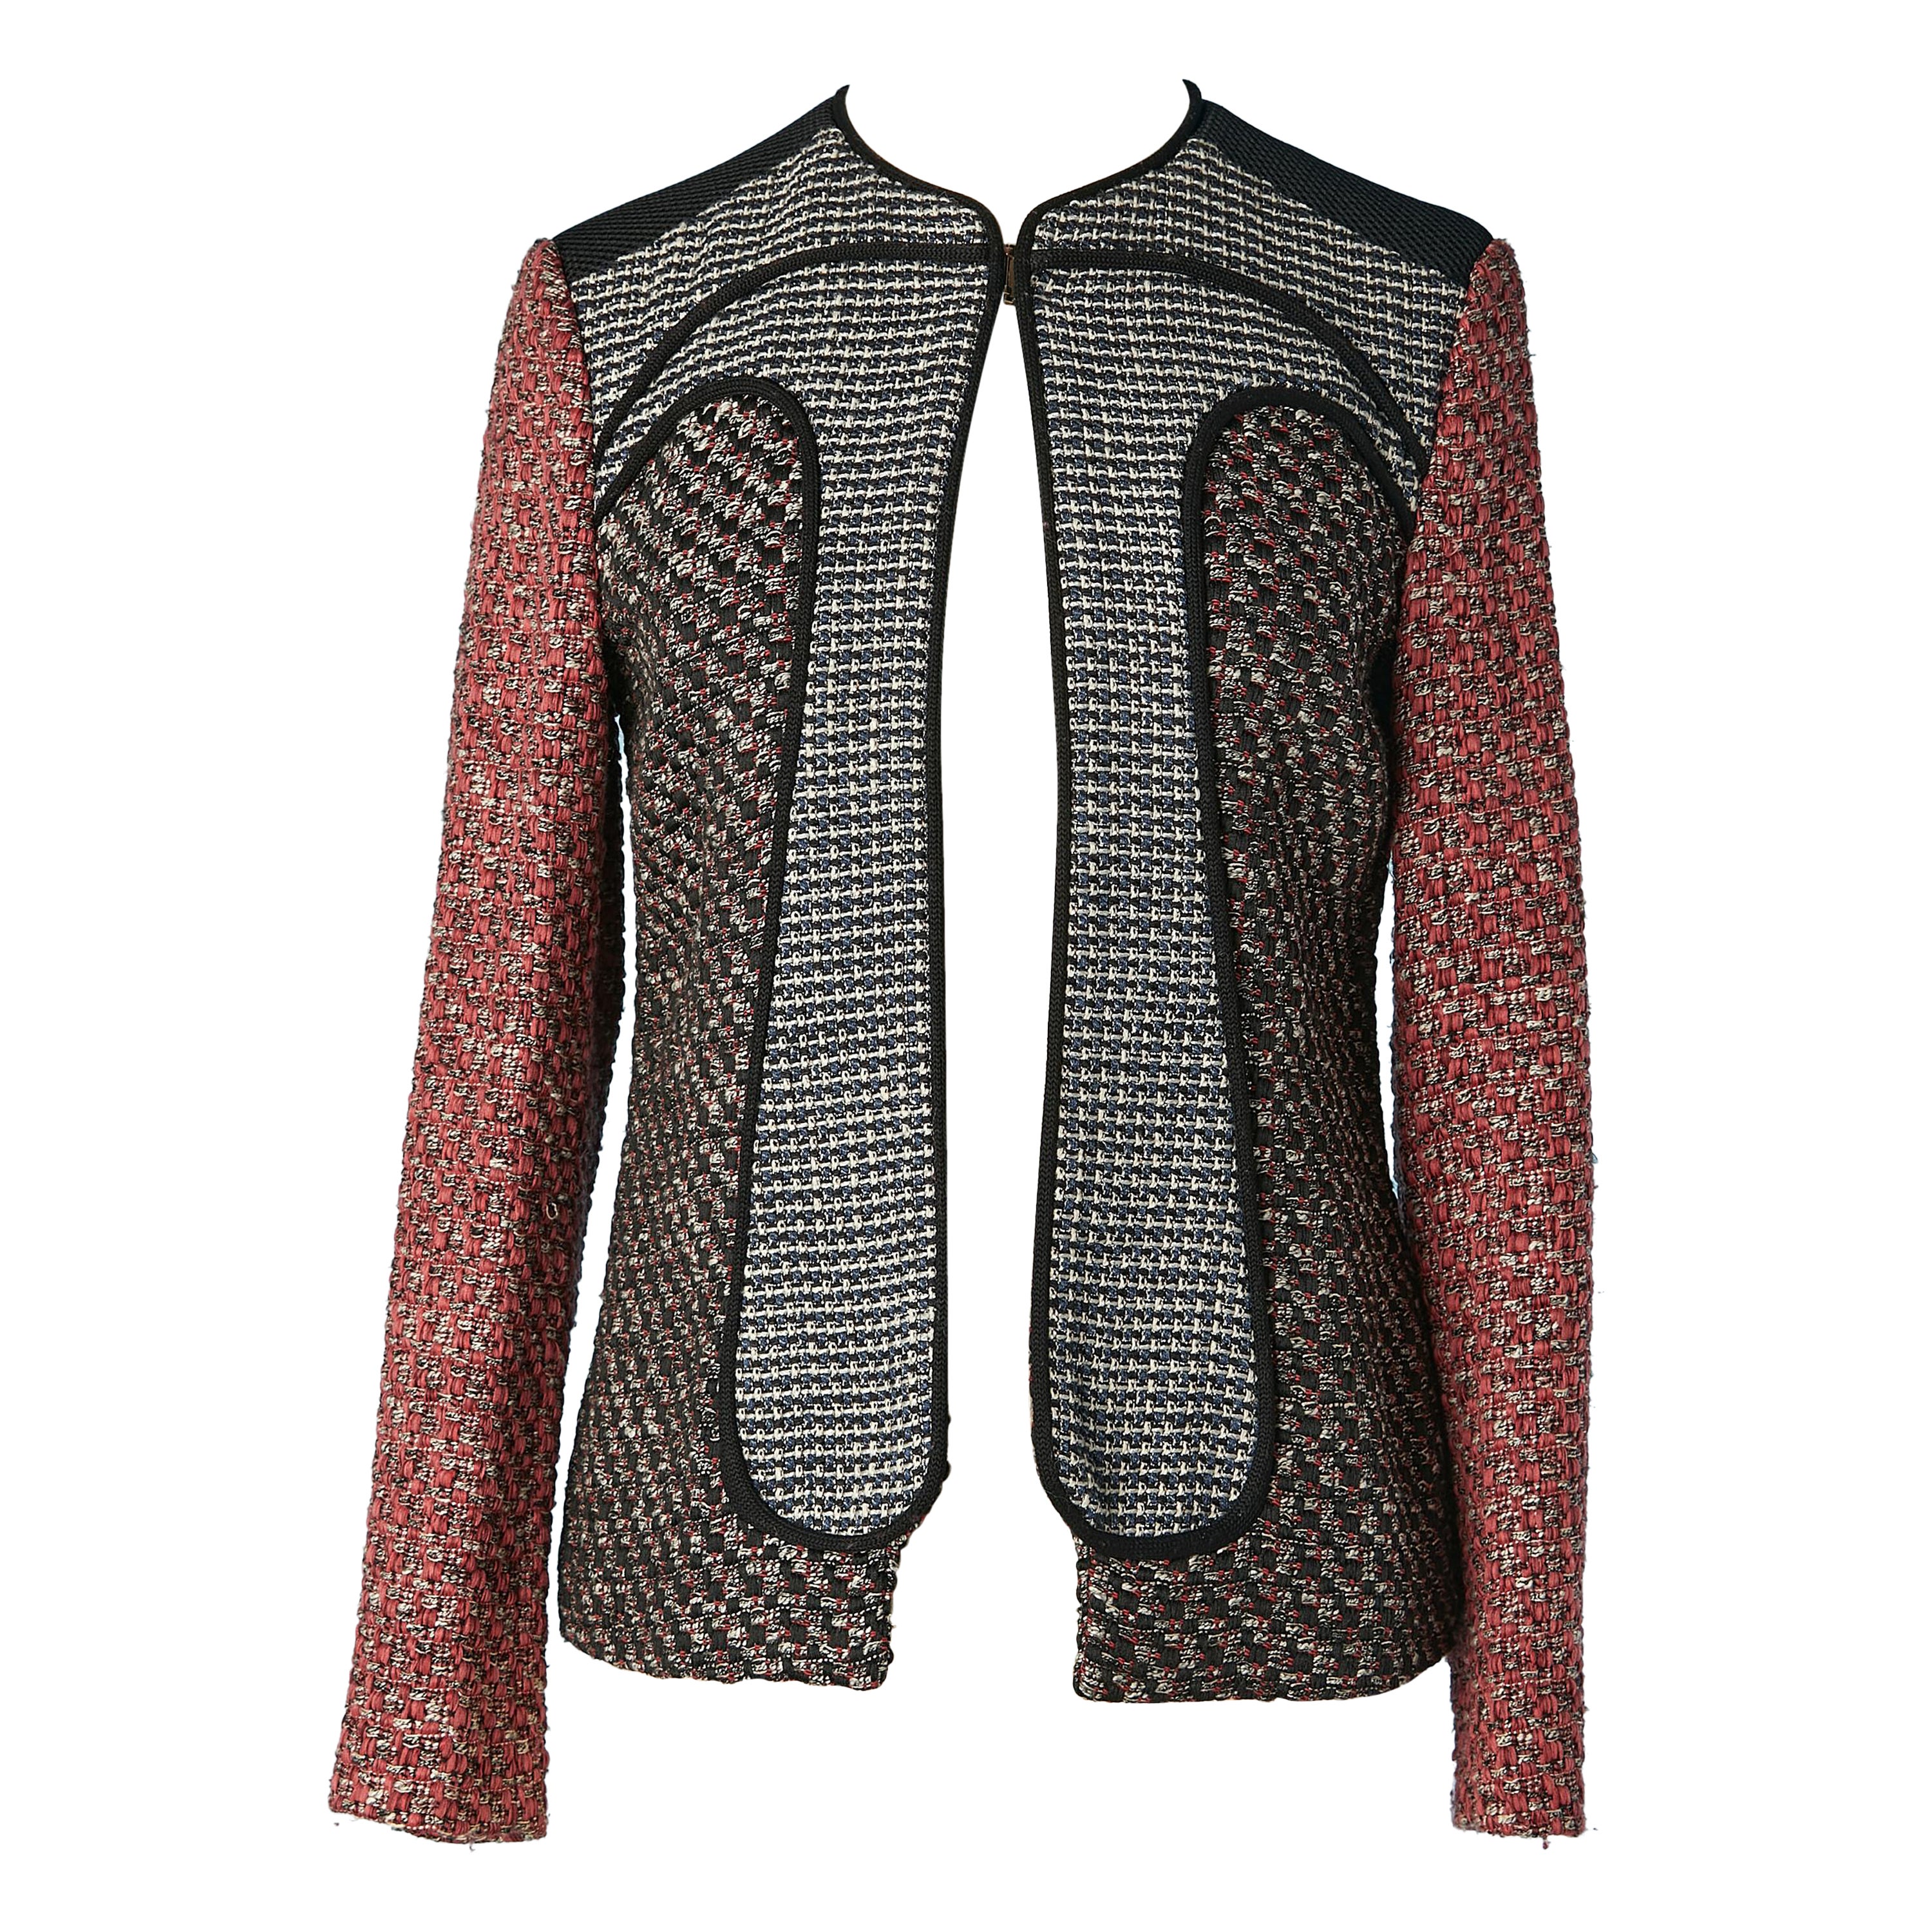 Edge to edge jacket made with 3 type of tweed and technical fabric M Missoni  For Sale